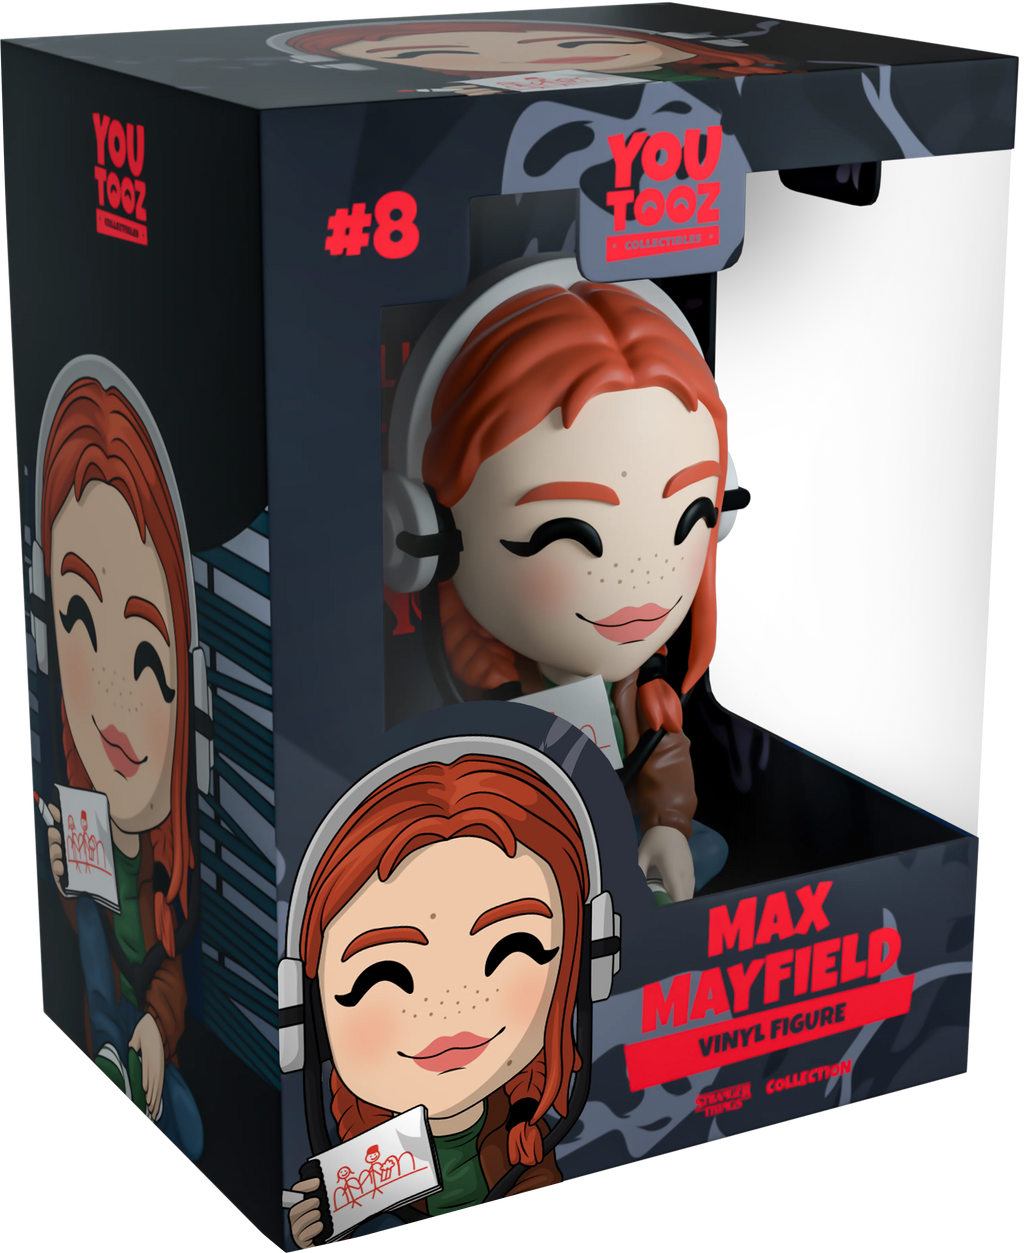 Stranger Things - MAX Mayfield Boxed Vinyl Figure by YouTooz Collectibles